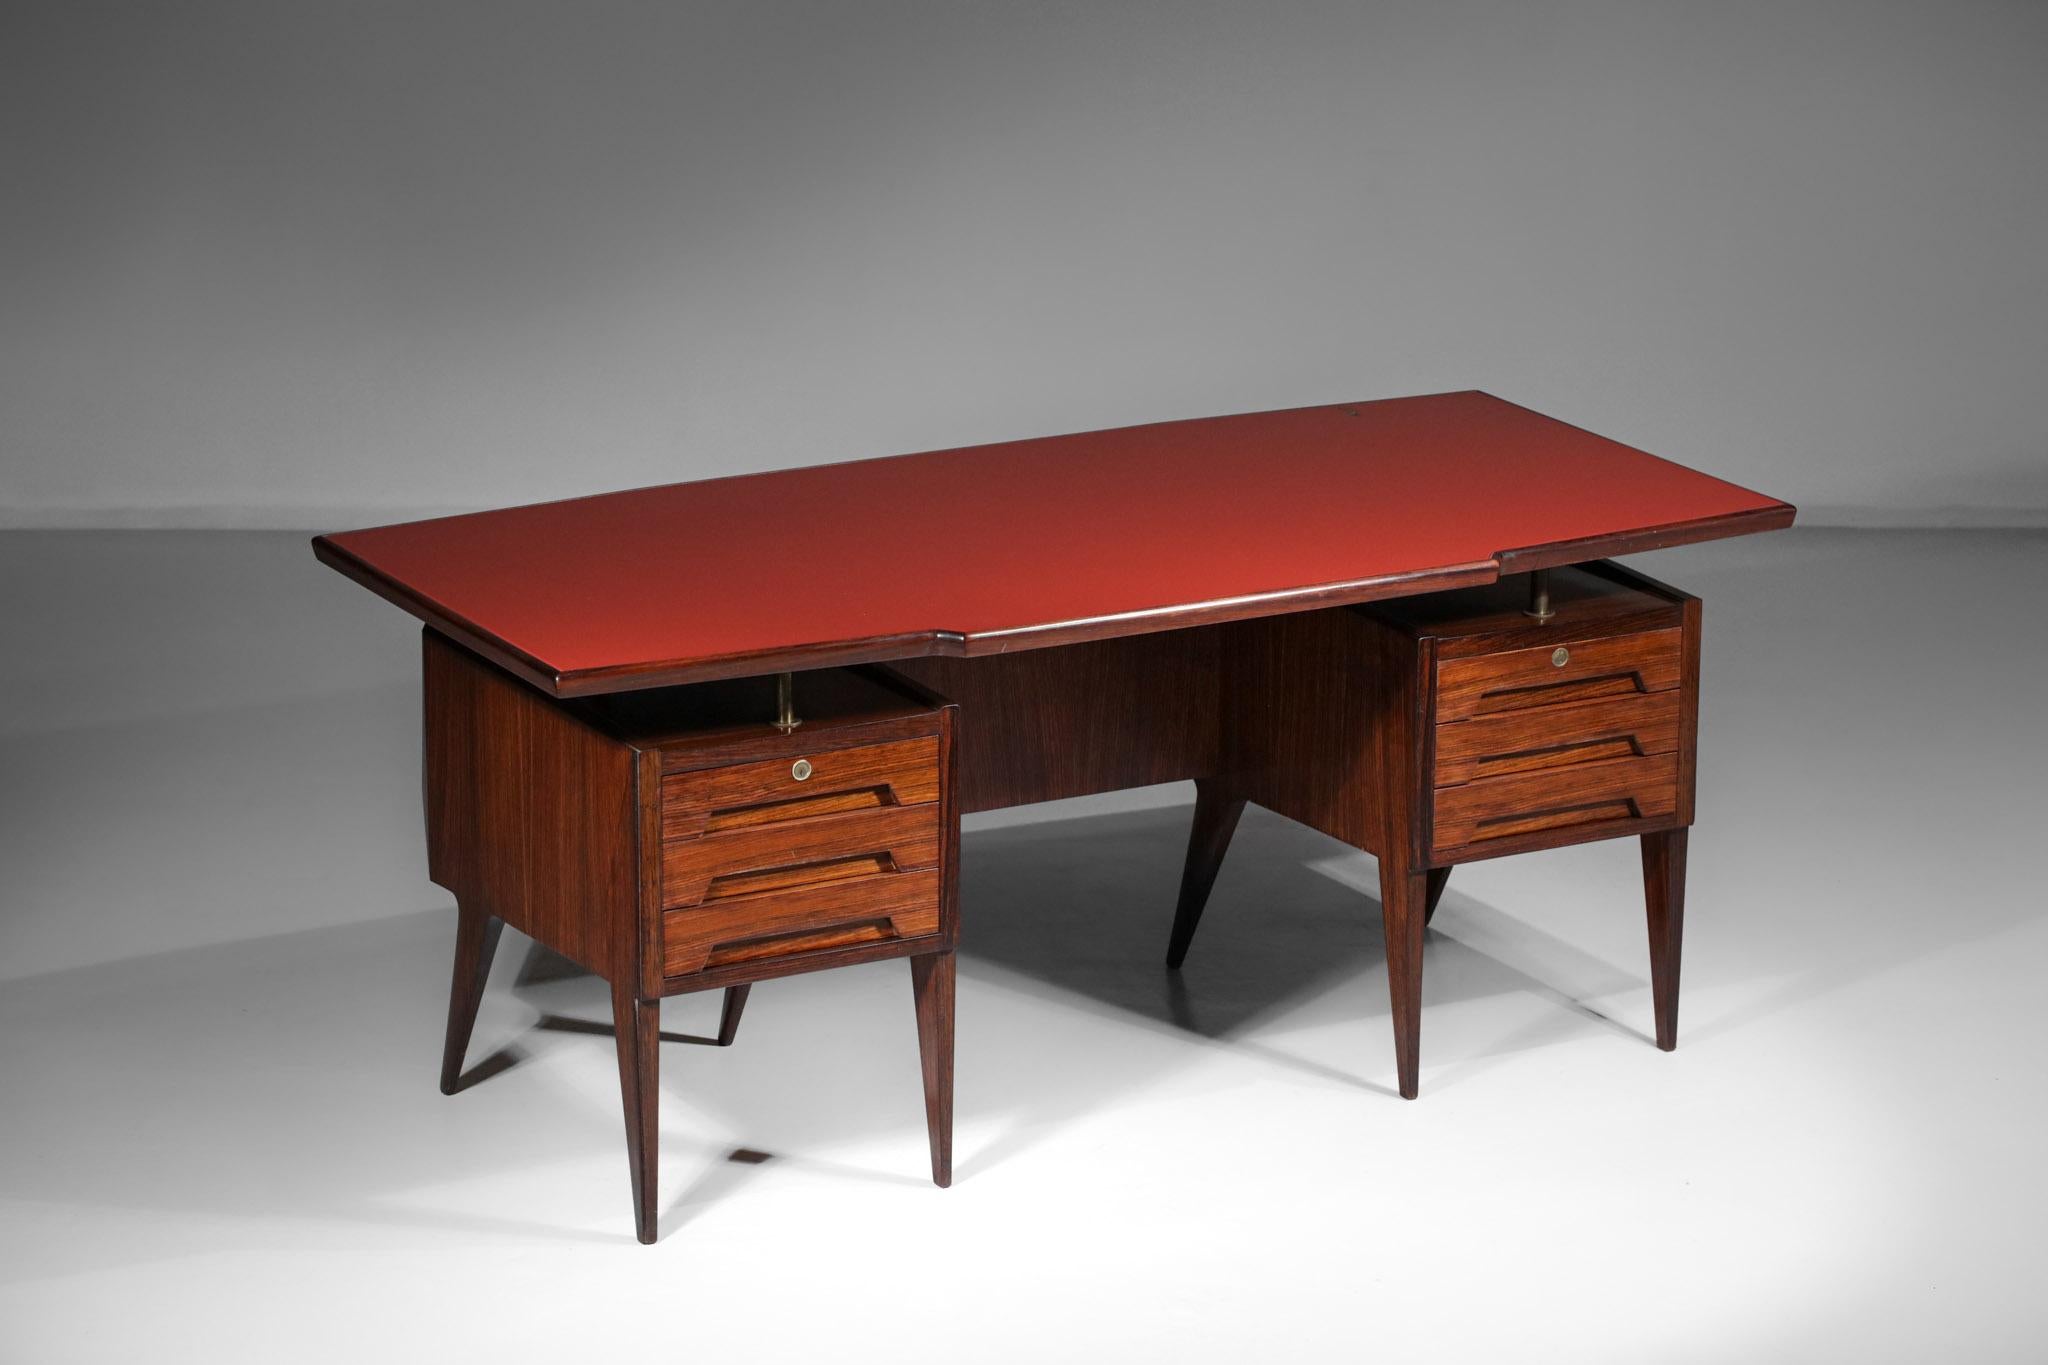 Large desk from the 1950s by Italian designer Vittorio Dassi. Solid and veneered wood structure, red glass top. The desk is composed of six deep drawers divided in two boxes. Very original desk with its 